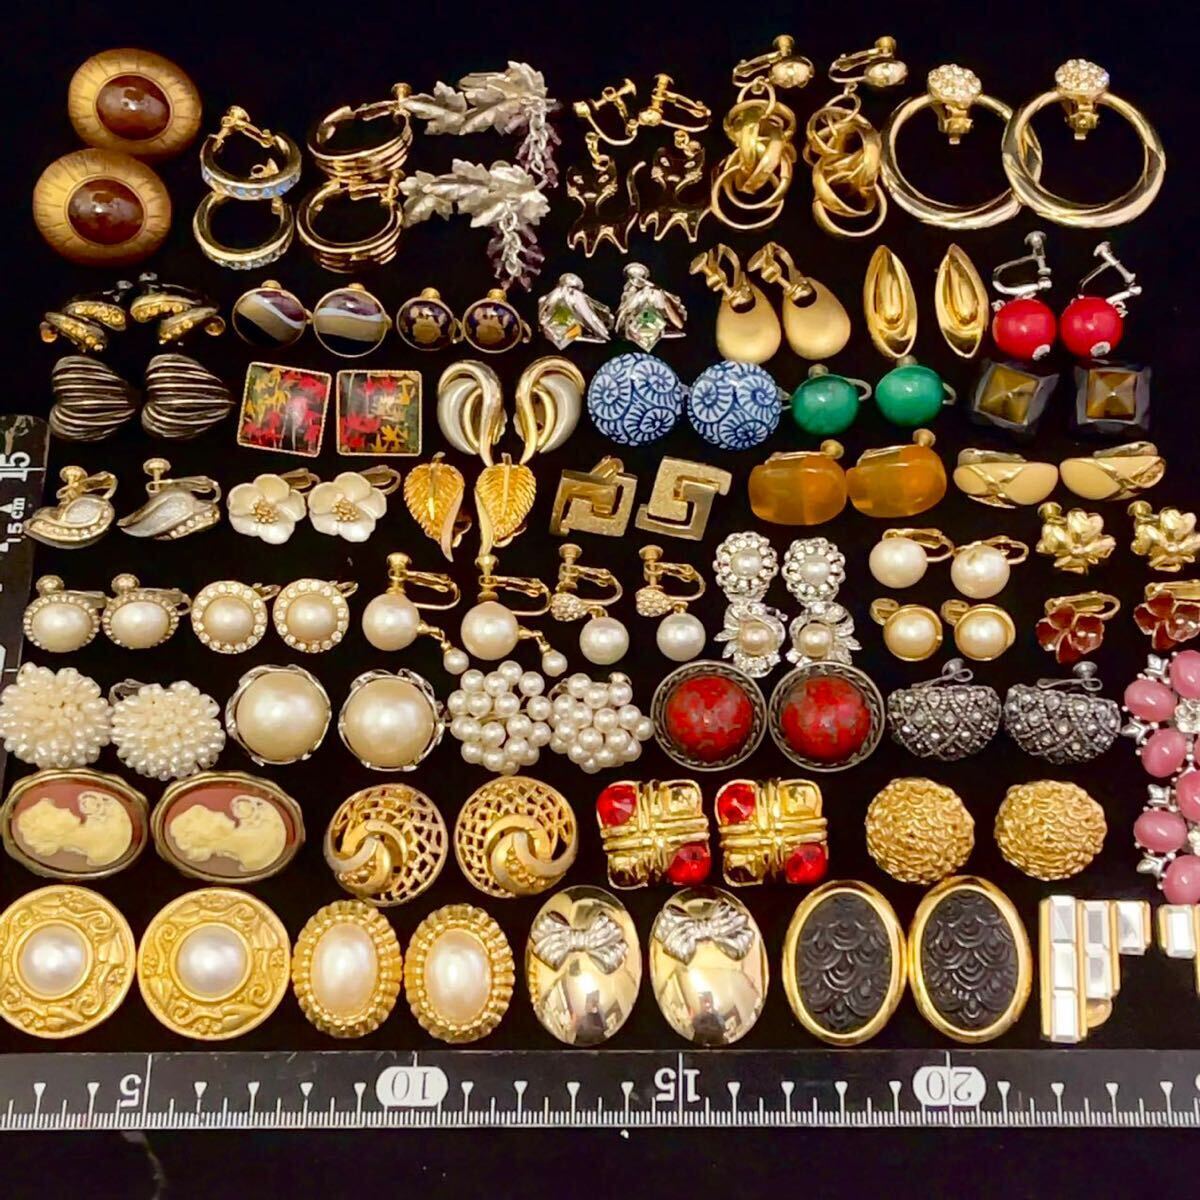 1 jpy Vintage earrings 50 pair summarize large amount set the 7 treasures . pearl ceramics natural stone Gold color ORENA/MONET/800 etc. stamp thing contains . summarize 